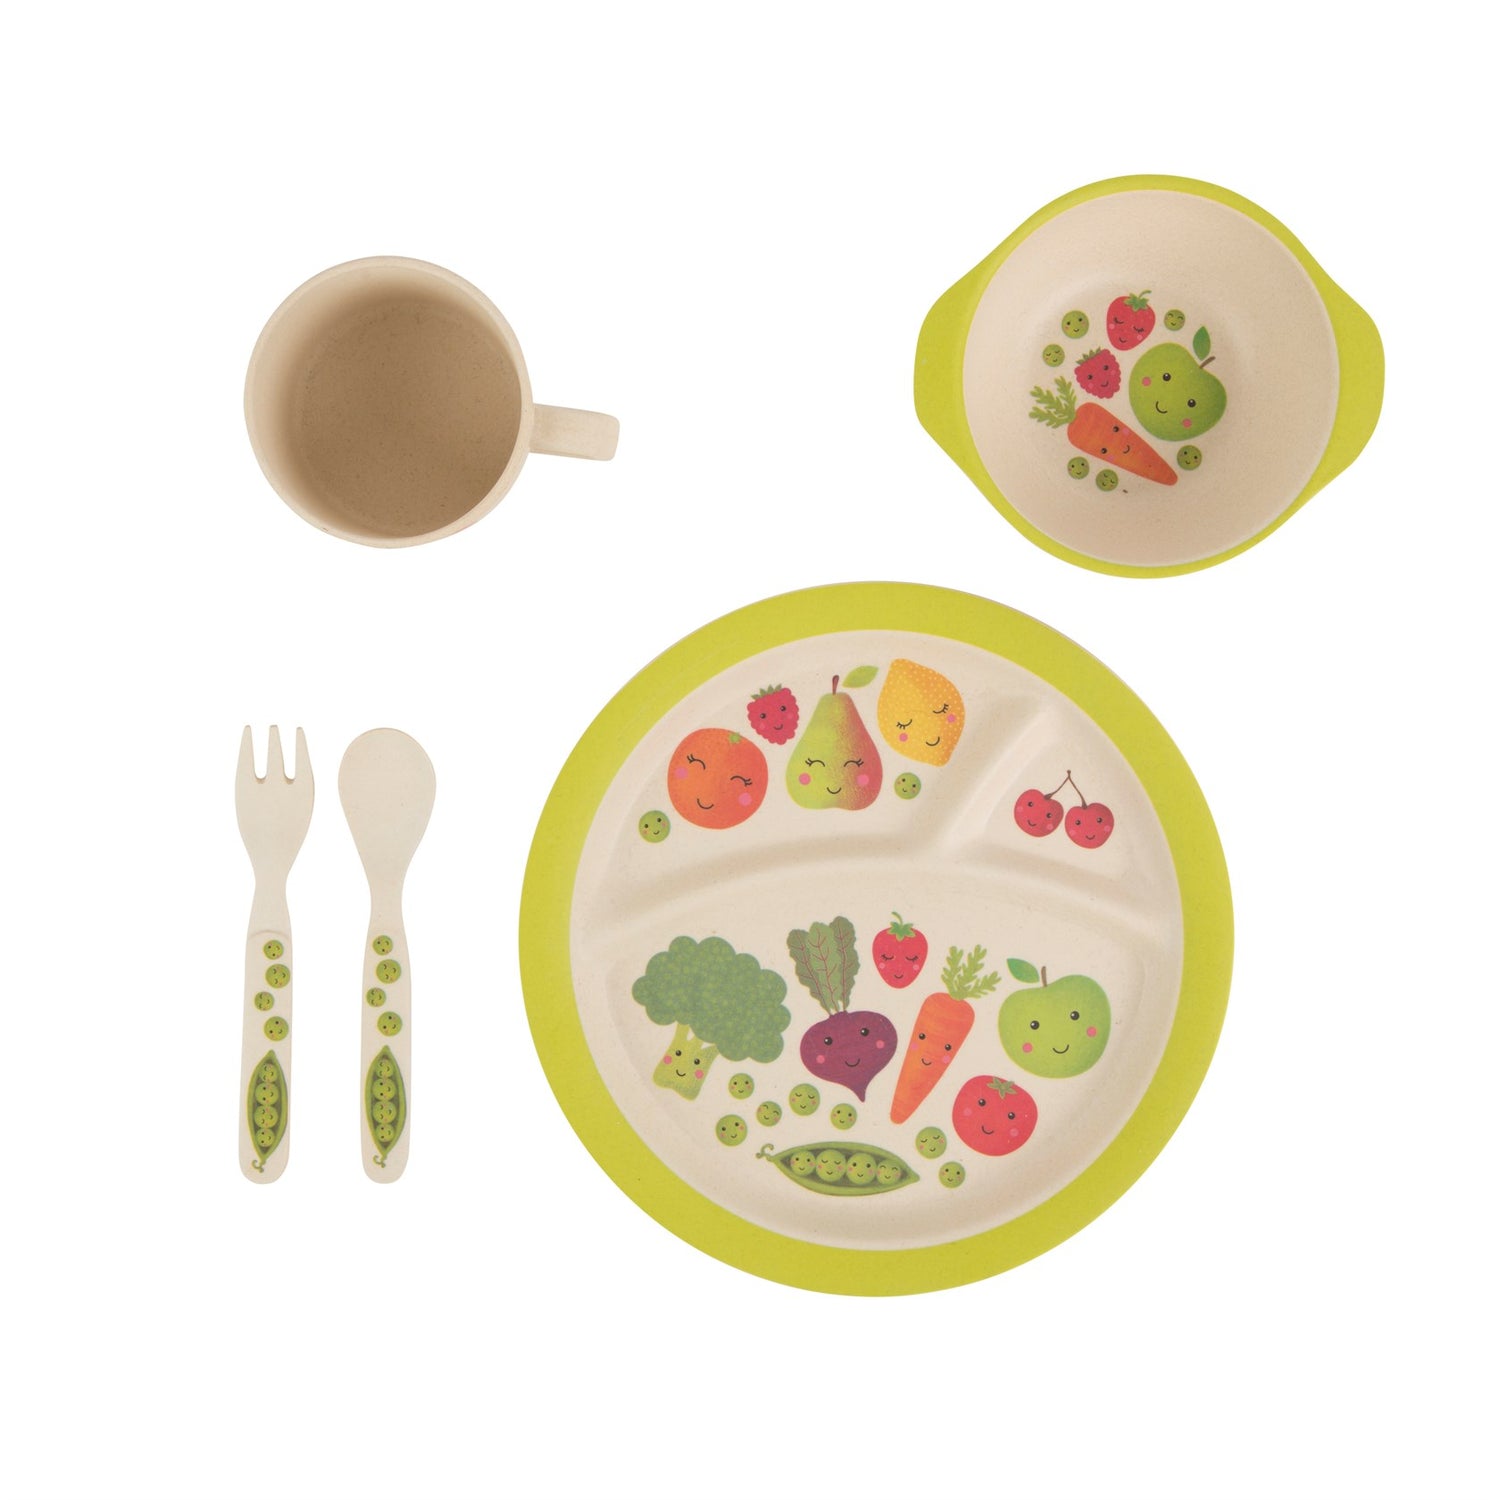 Stay healthy with this gorgeous bamboo cutlery set (fork and spoon) featuring fun peas in a pod.